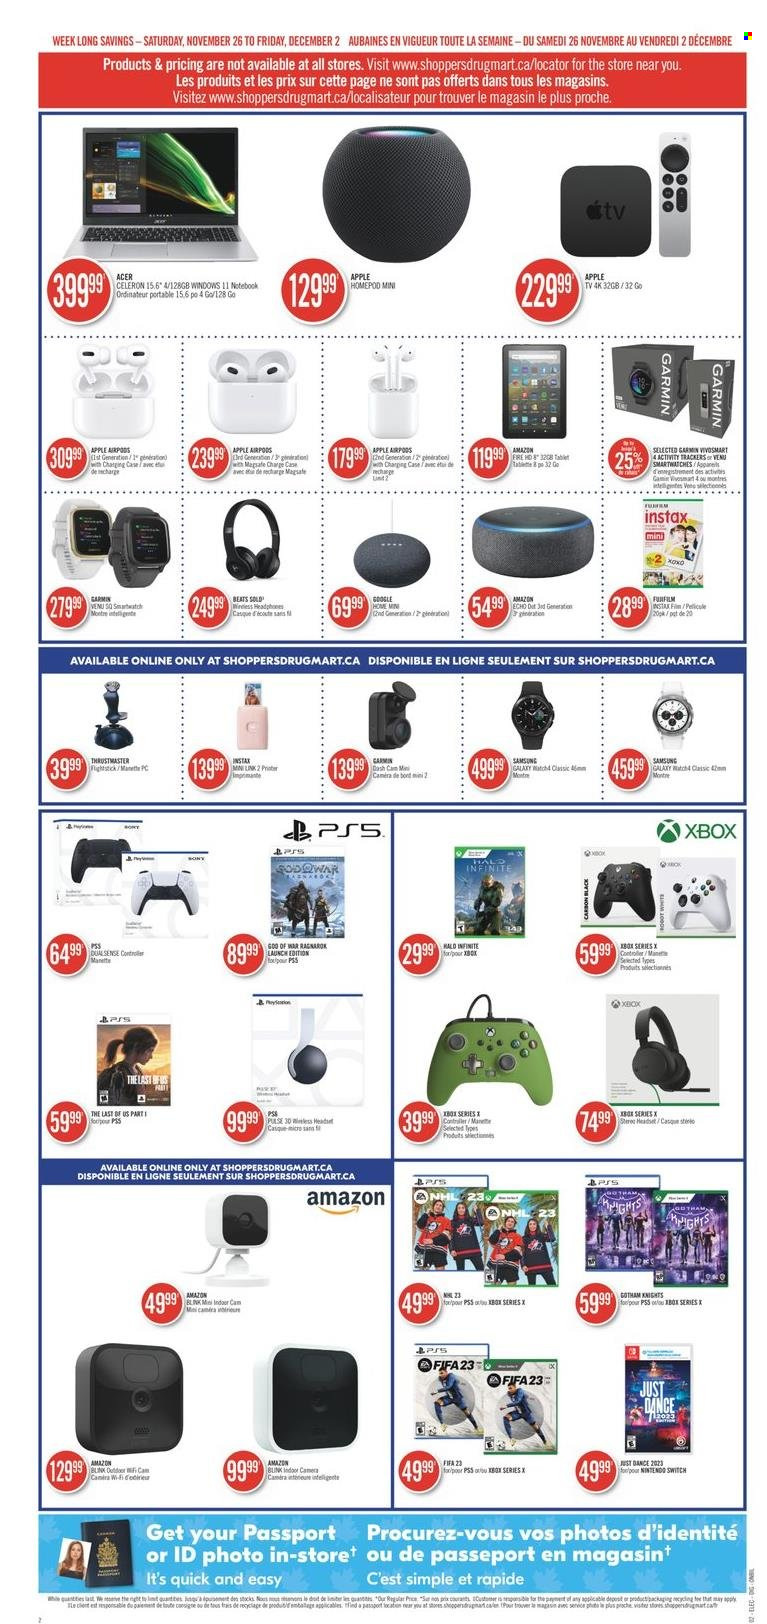 thumbnail - Shoppers Drug Mart Flyer - November 26, 2022 - December 02, 2022 - Sales products - Sony, Nintendo Switch, Acer, tablet, Amazon Fire, Apple, Samsung Galaxy, Samsung, Garmin, Xbox Series X, dashboard camera, Amazon Echo, Beats, headset, wireless headphones, headphones, Airpods, camera, Xbox. Page 9.